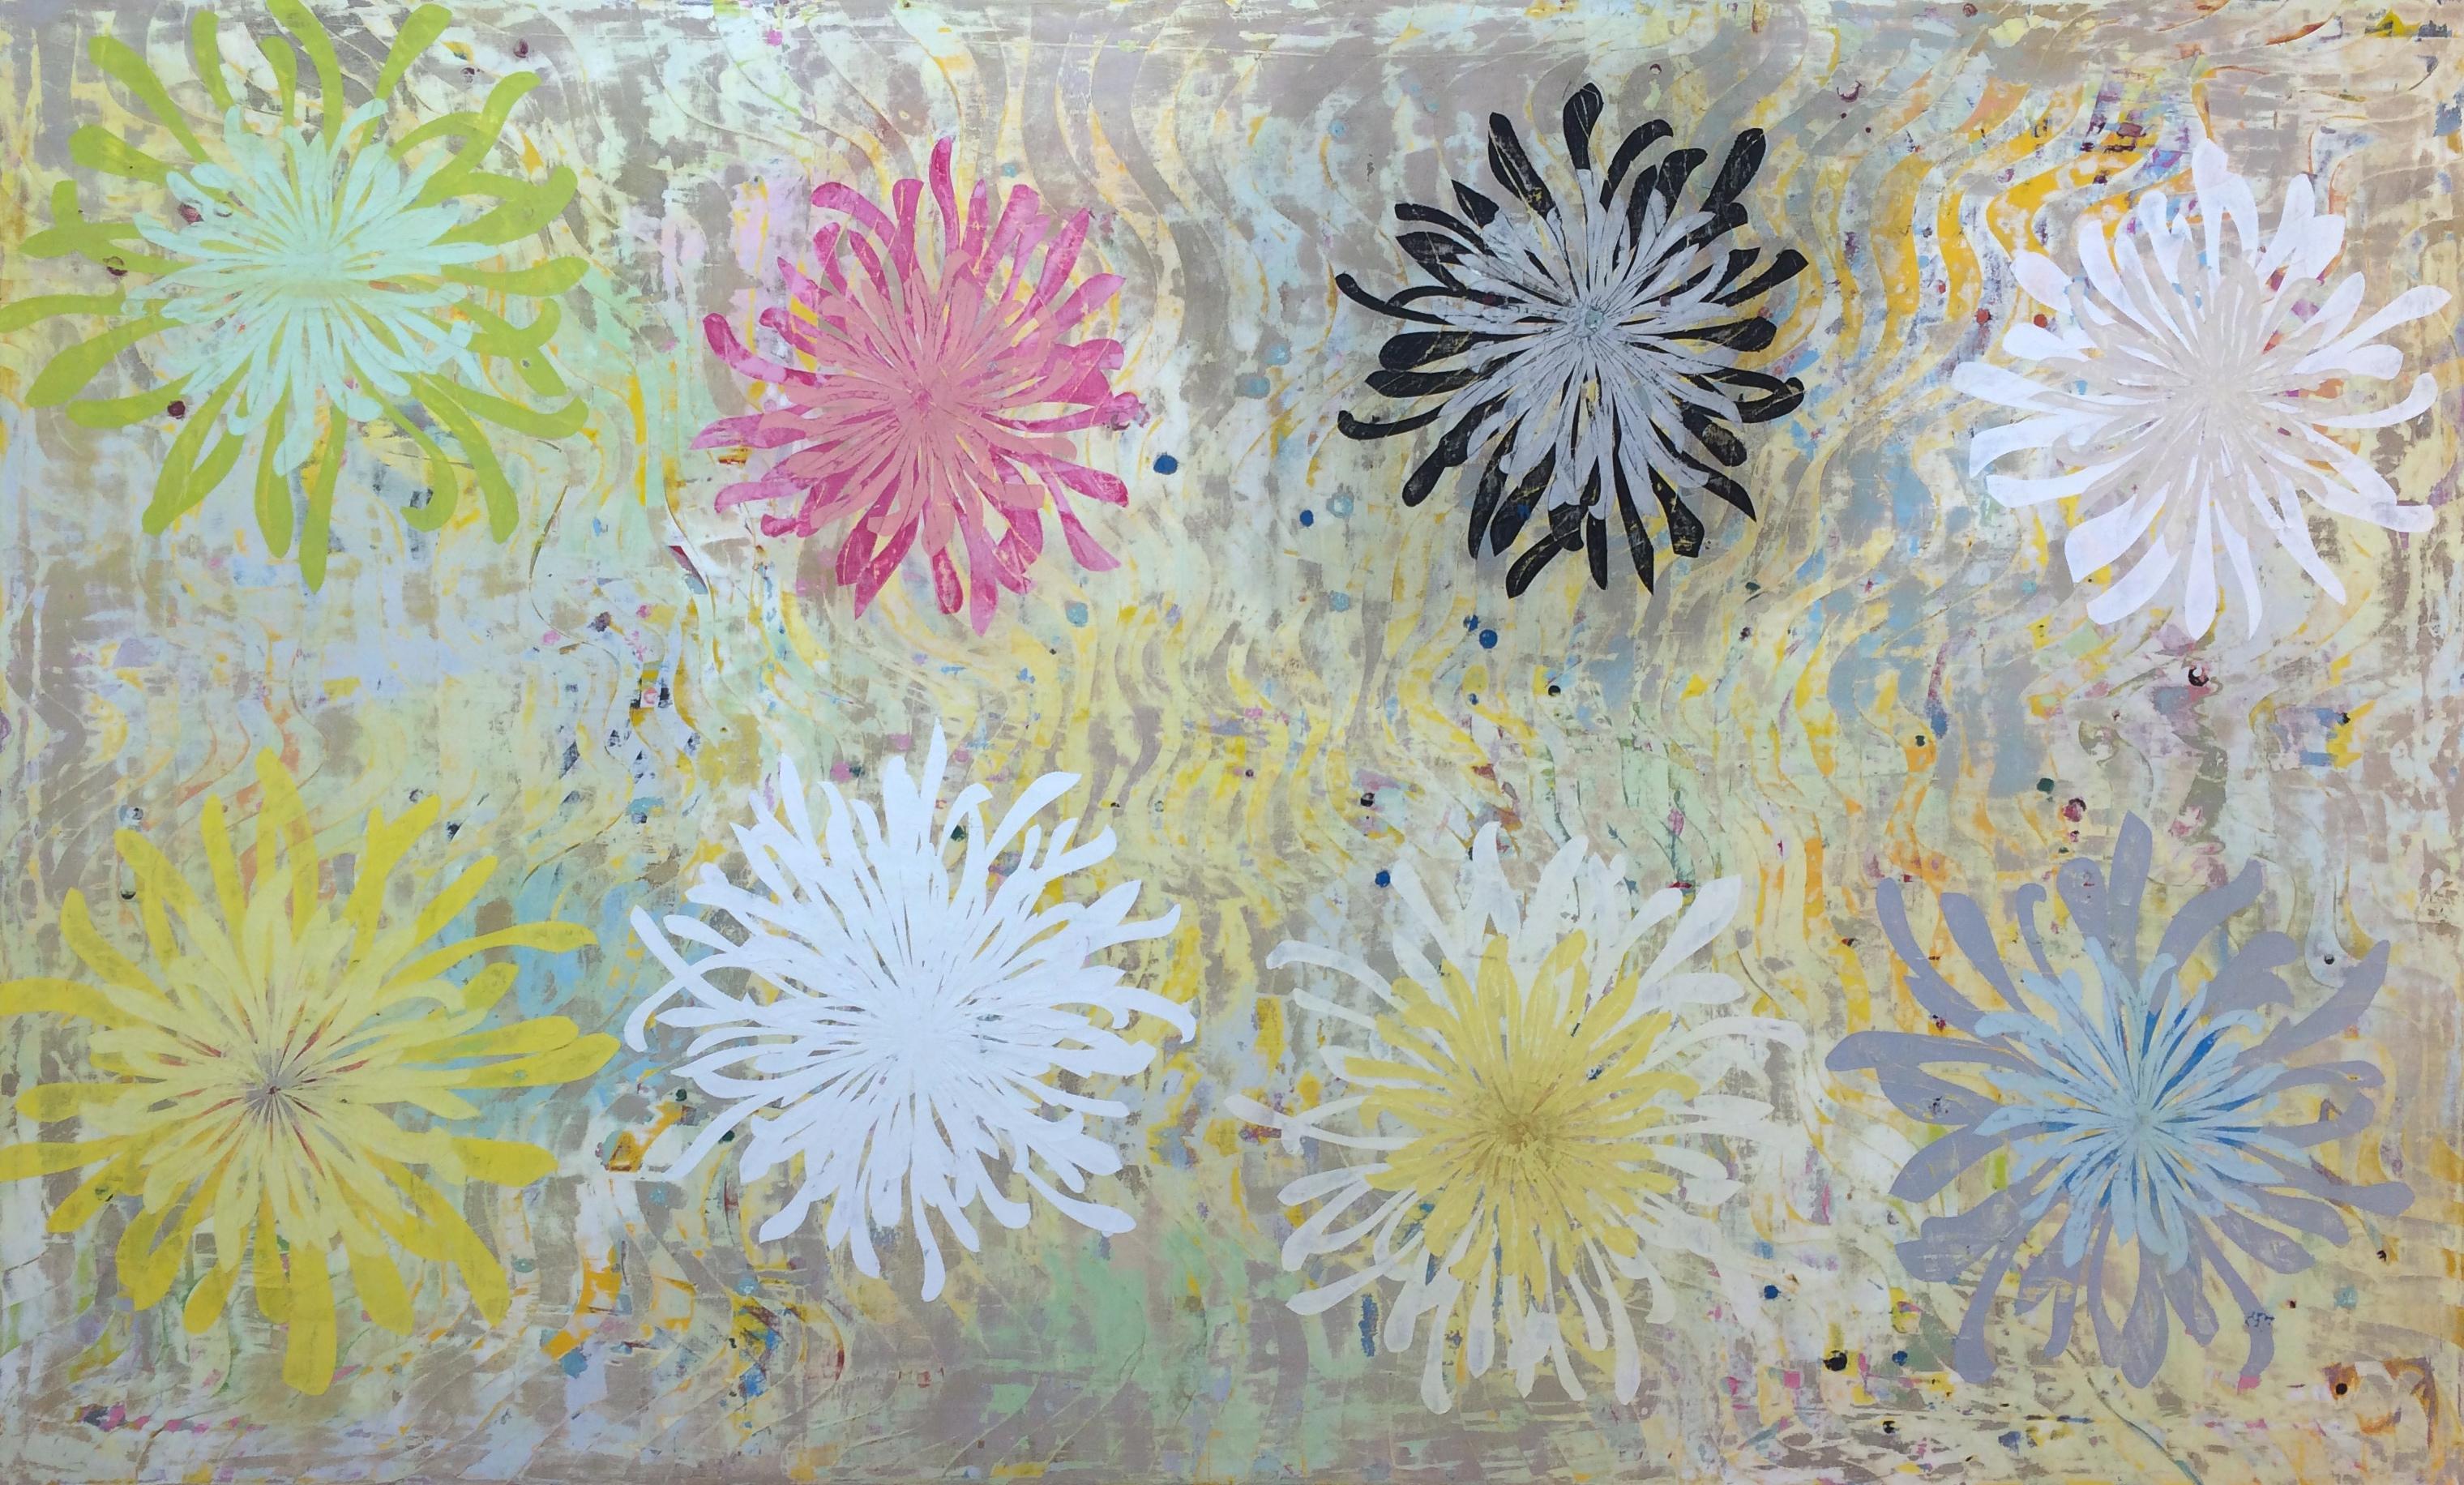 Perry Burns Figurative Painting - Chrysanthemum Tapestry, oil on canvas, 51" x 84"